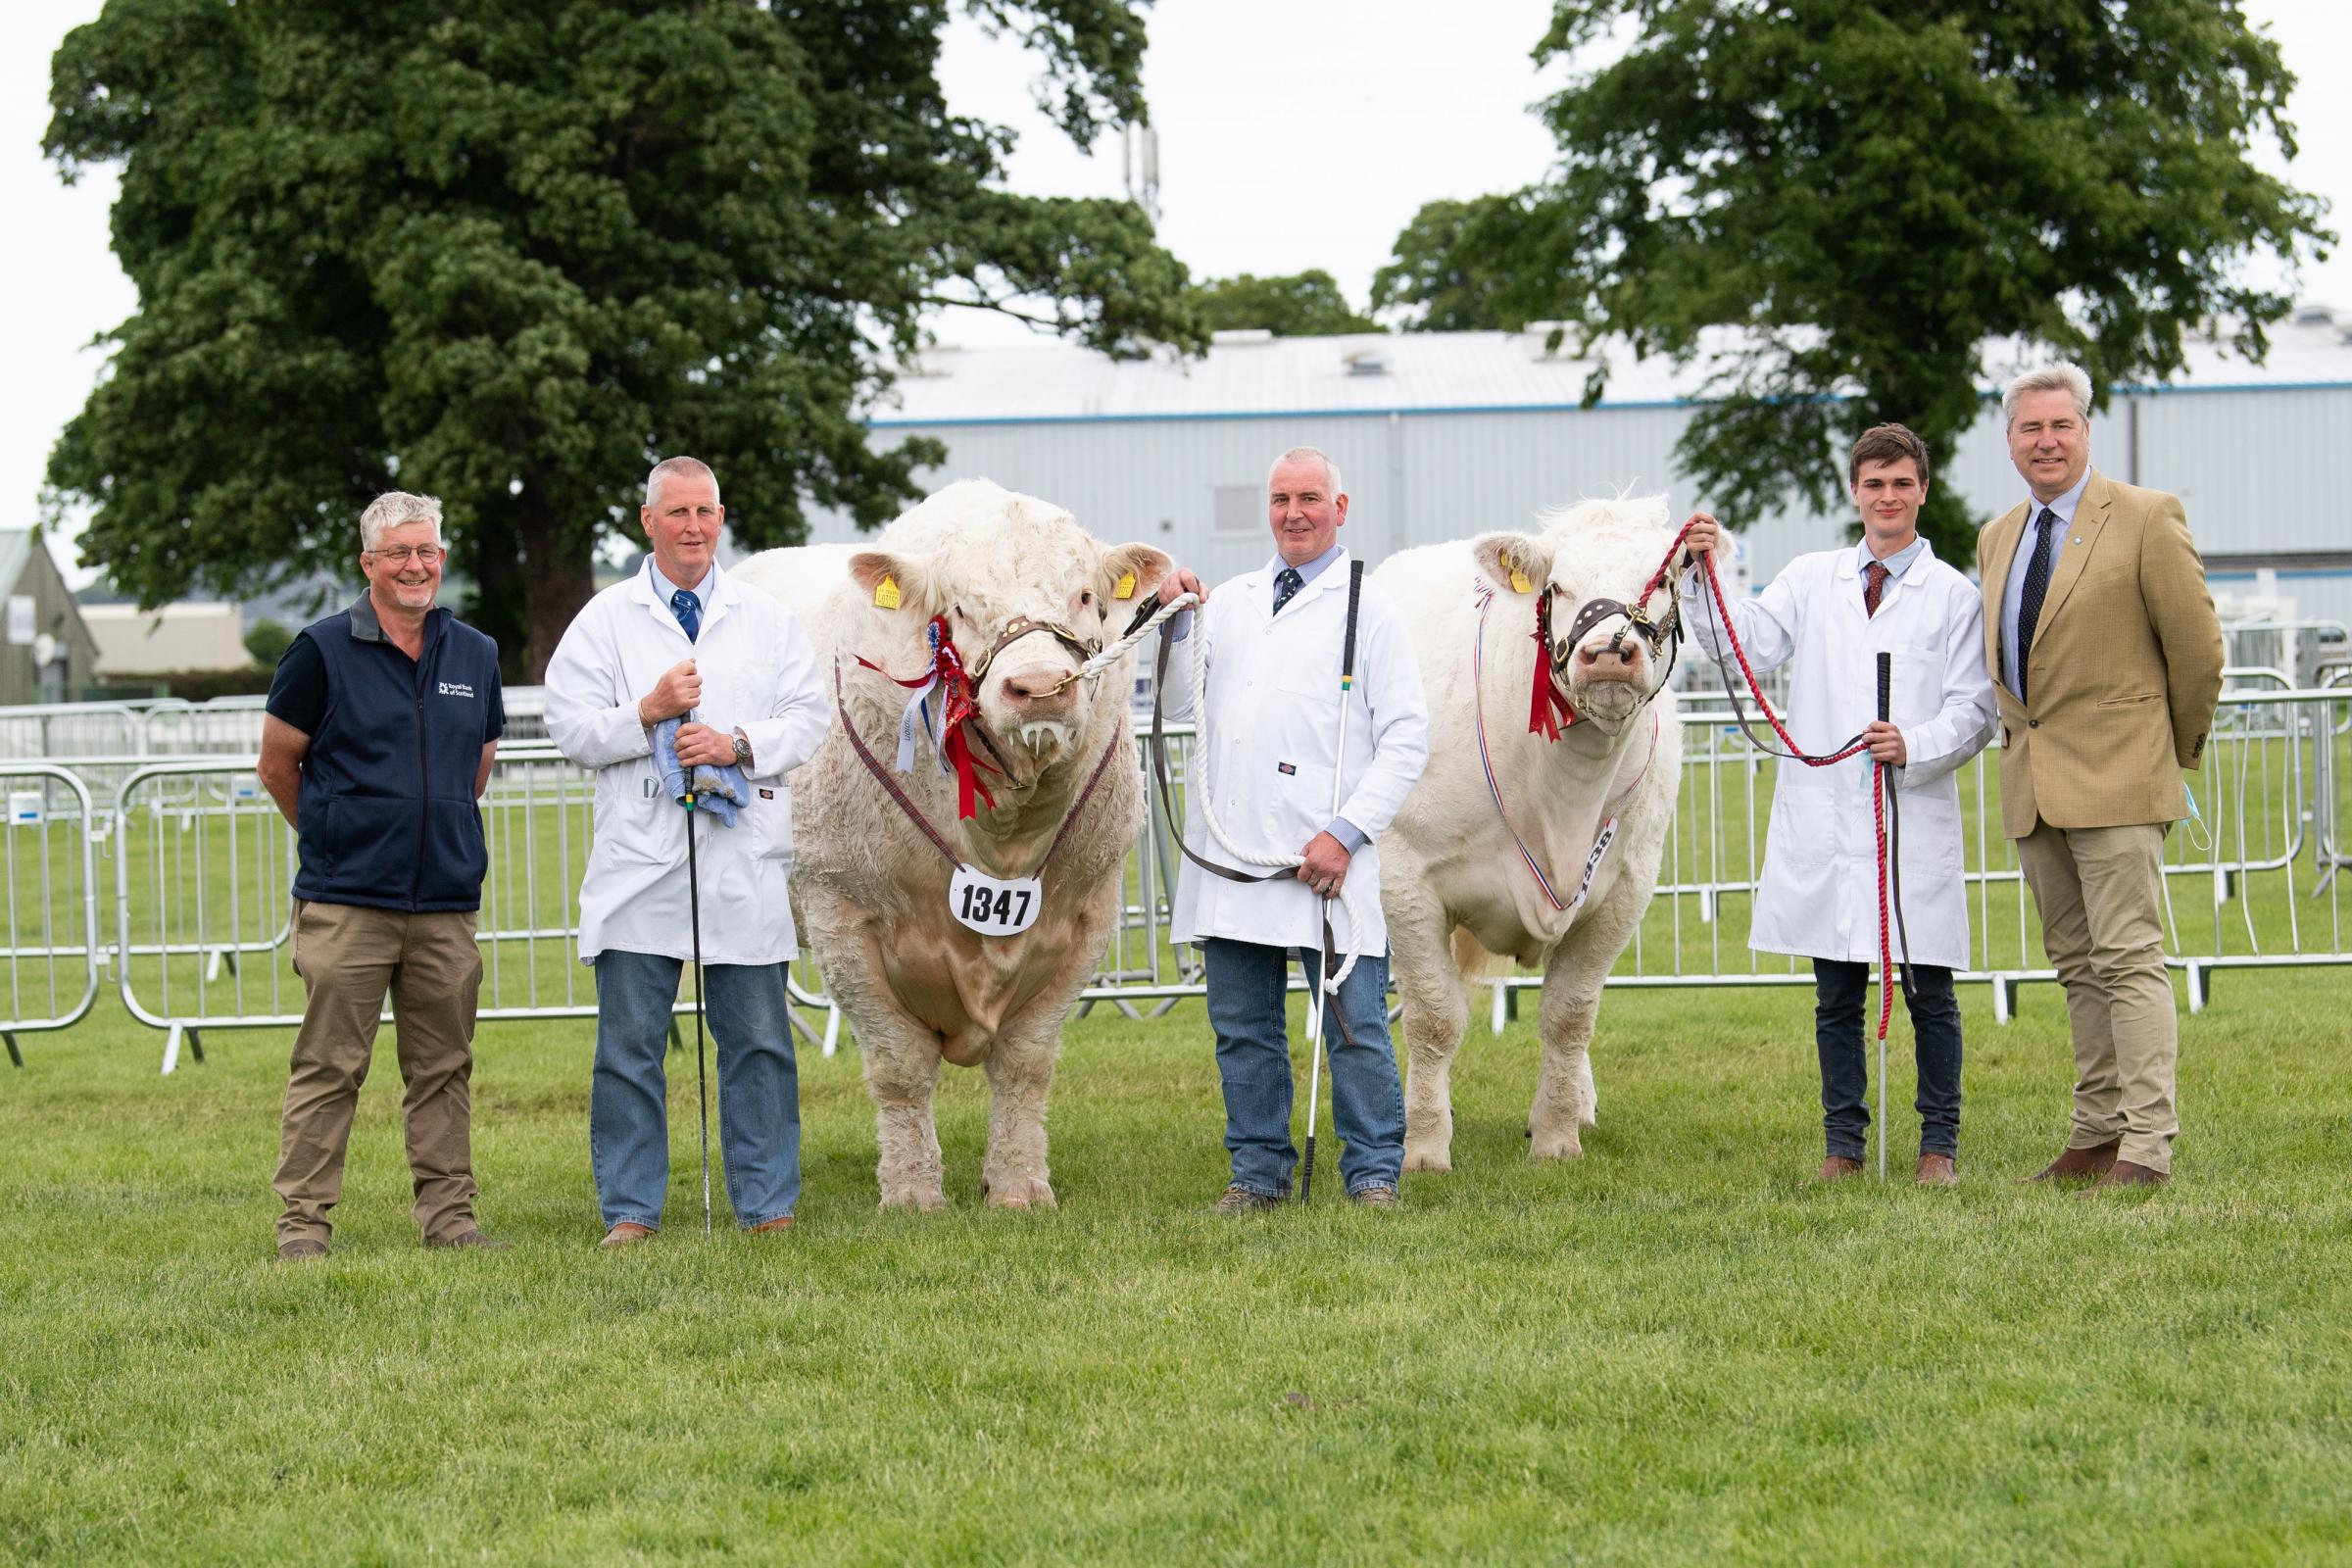 inter-breed pairs went to the Charolais with AJR FArms Maerdy Morwr teaming up with Harestone Mammamia from the Barclay family Ref:RH150621077 Rob Haining / The Scottish Farmer...